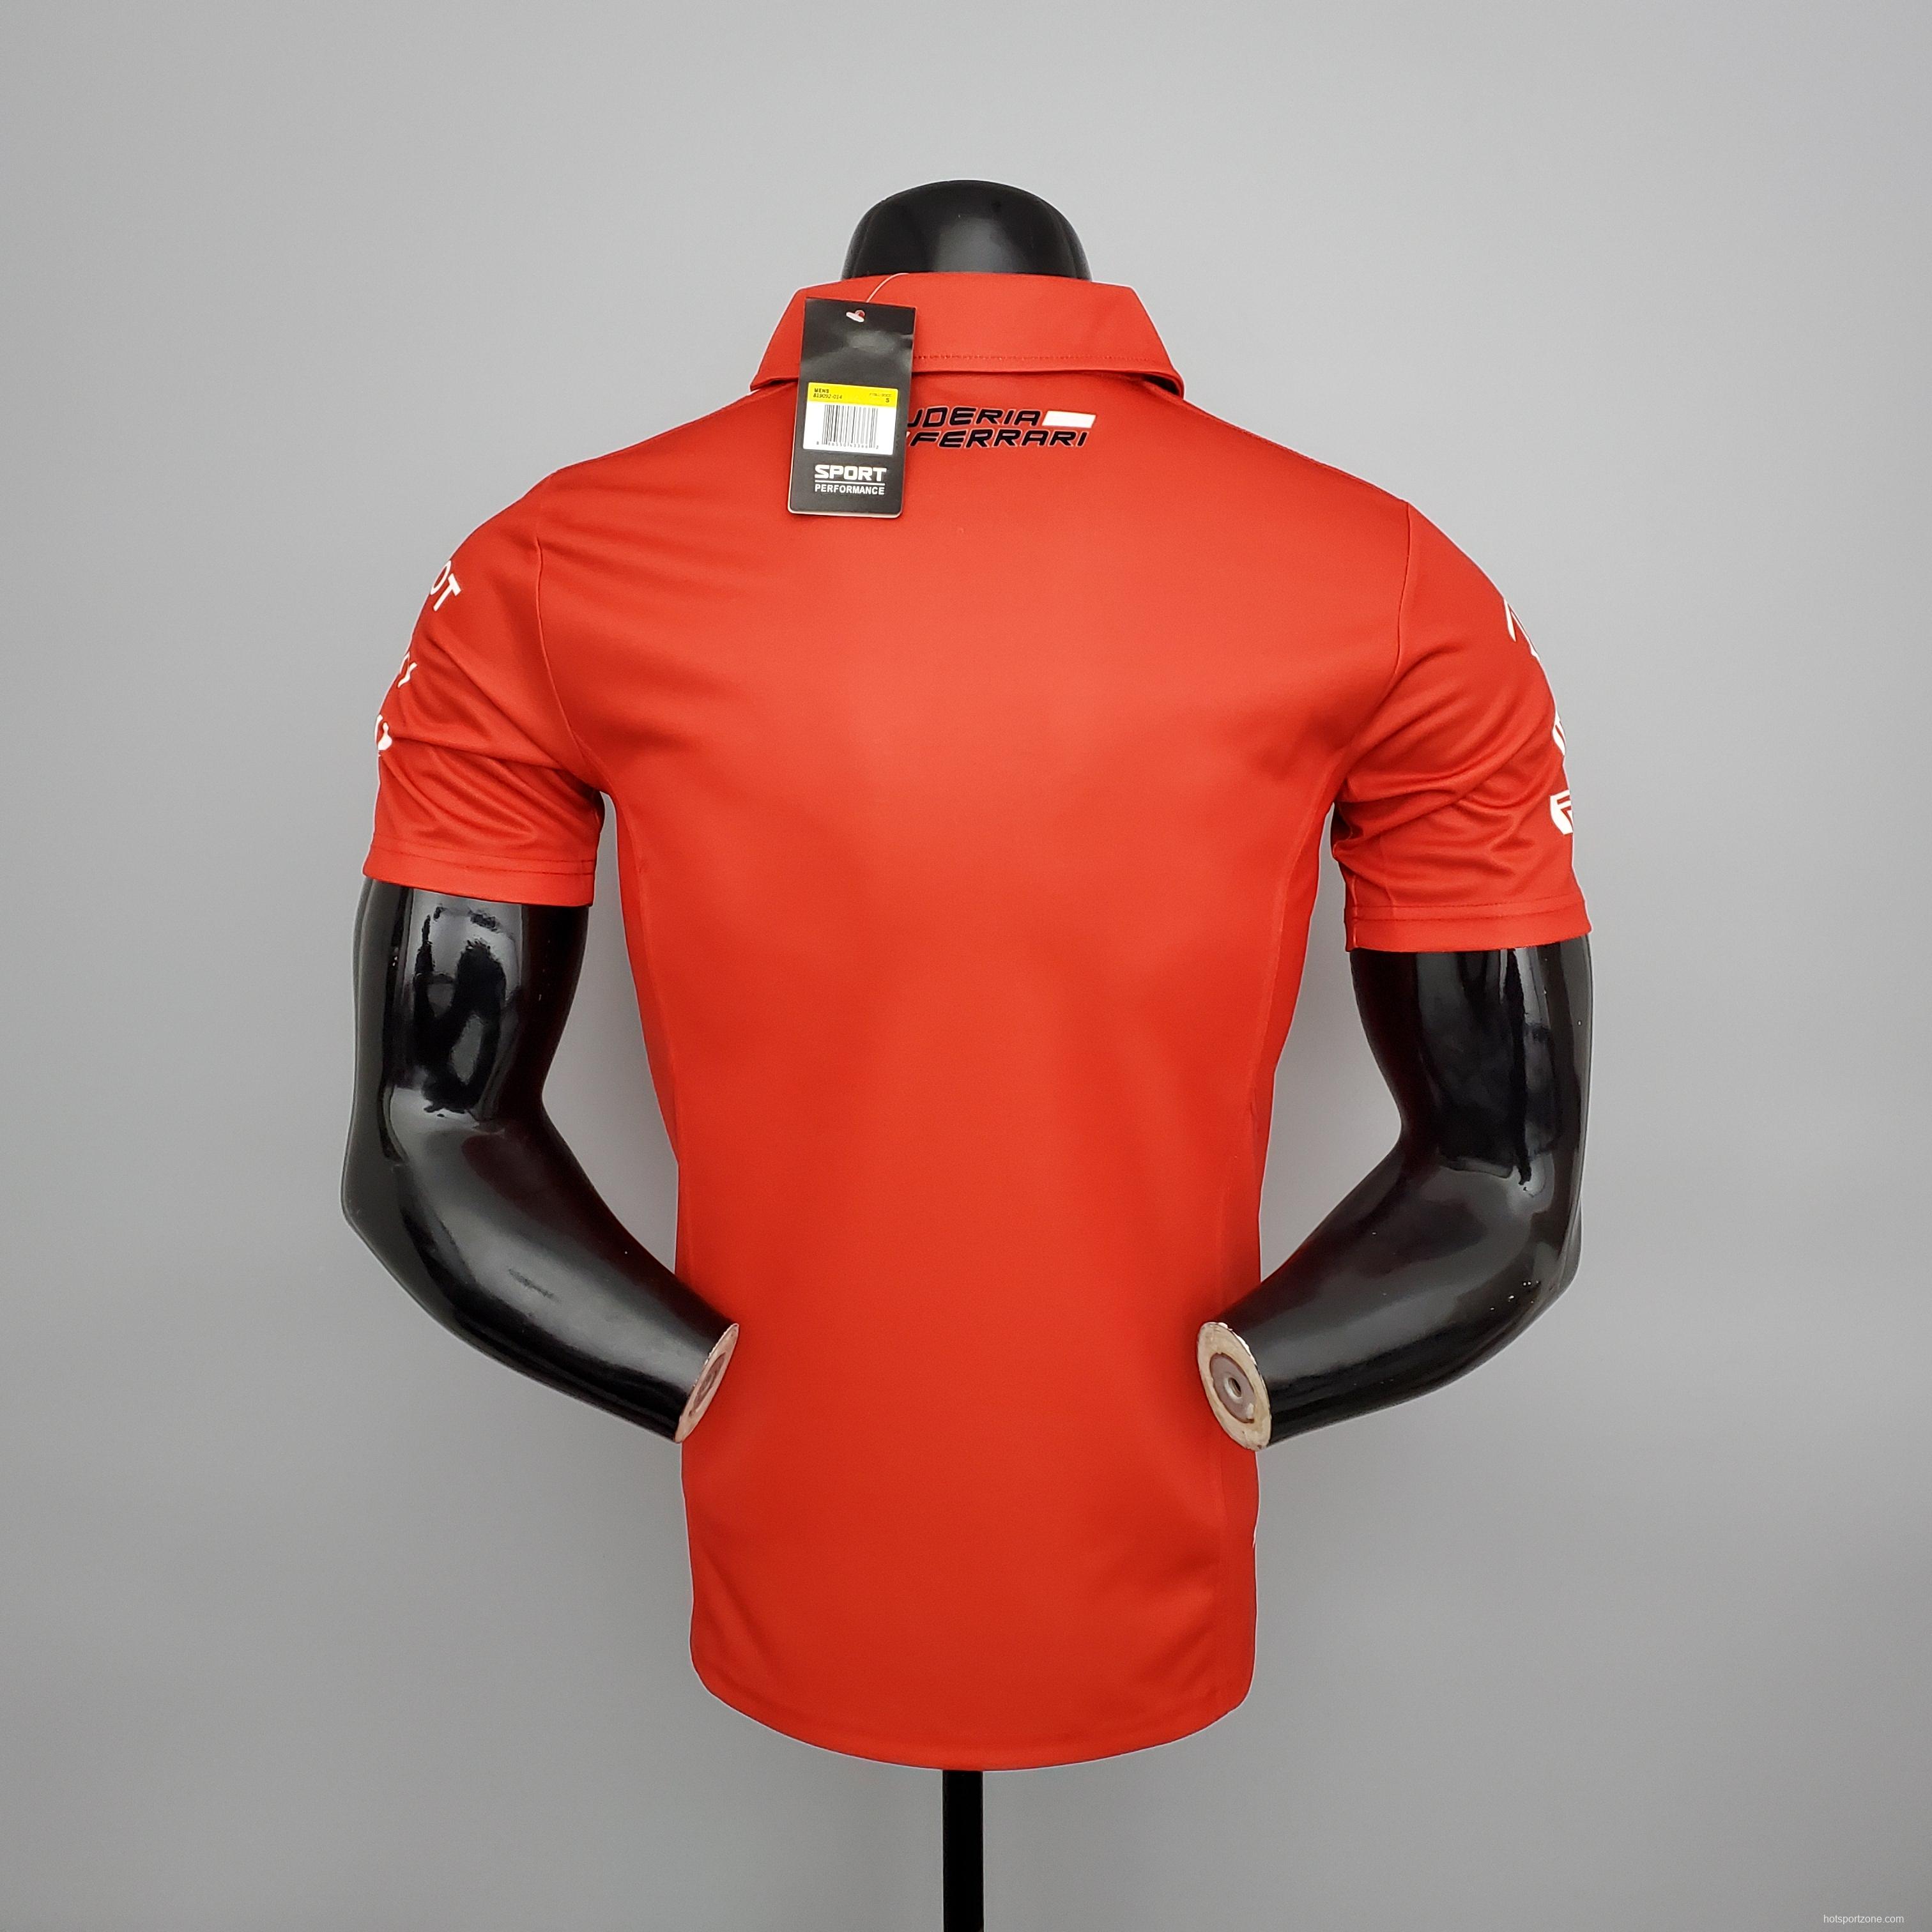 F1 Formula One; Ferrari racing suit Polo red S-5XL